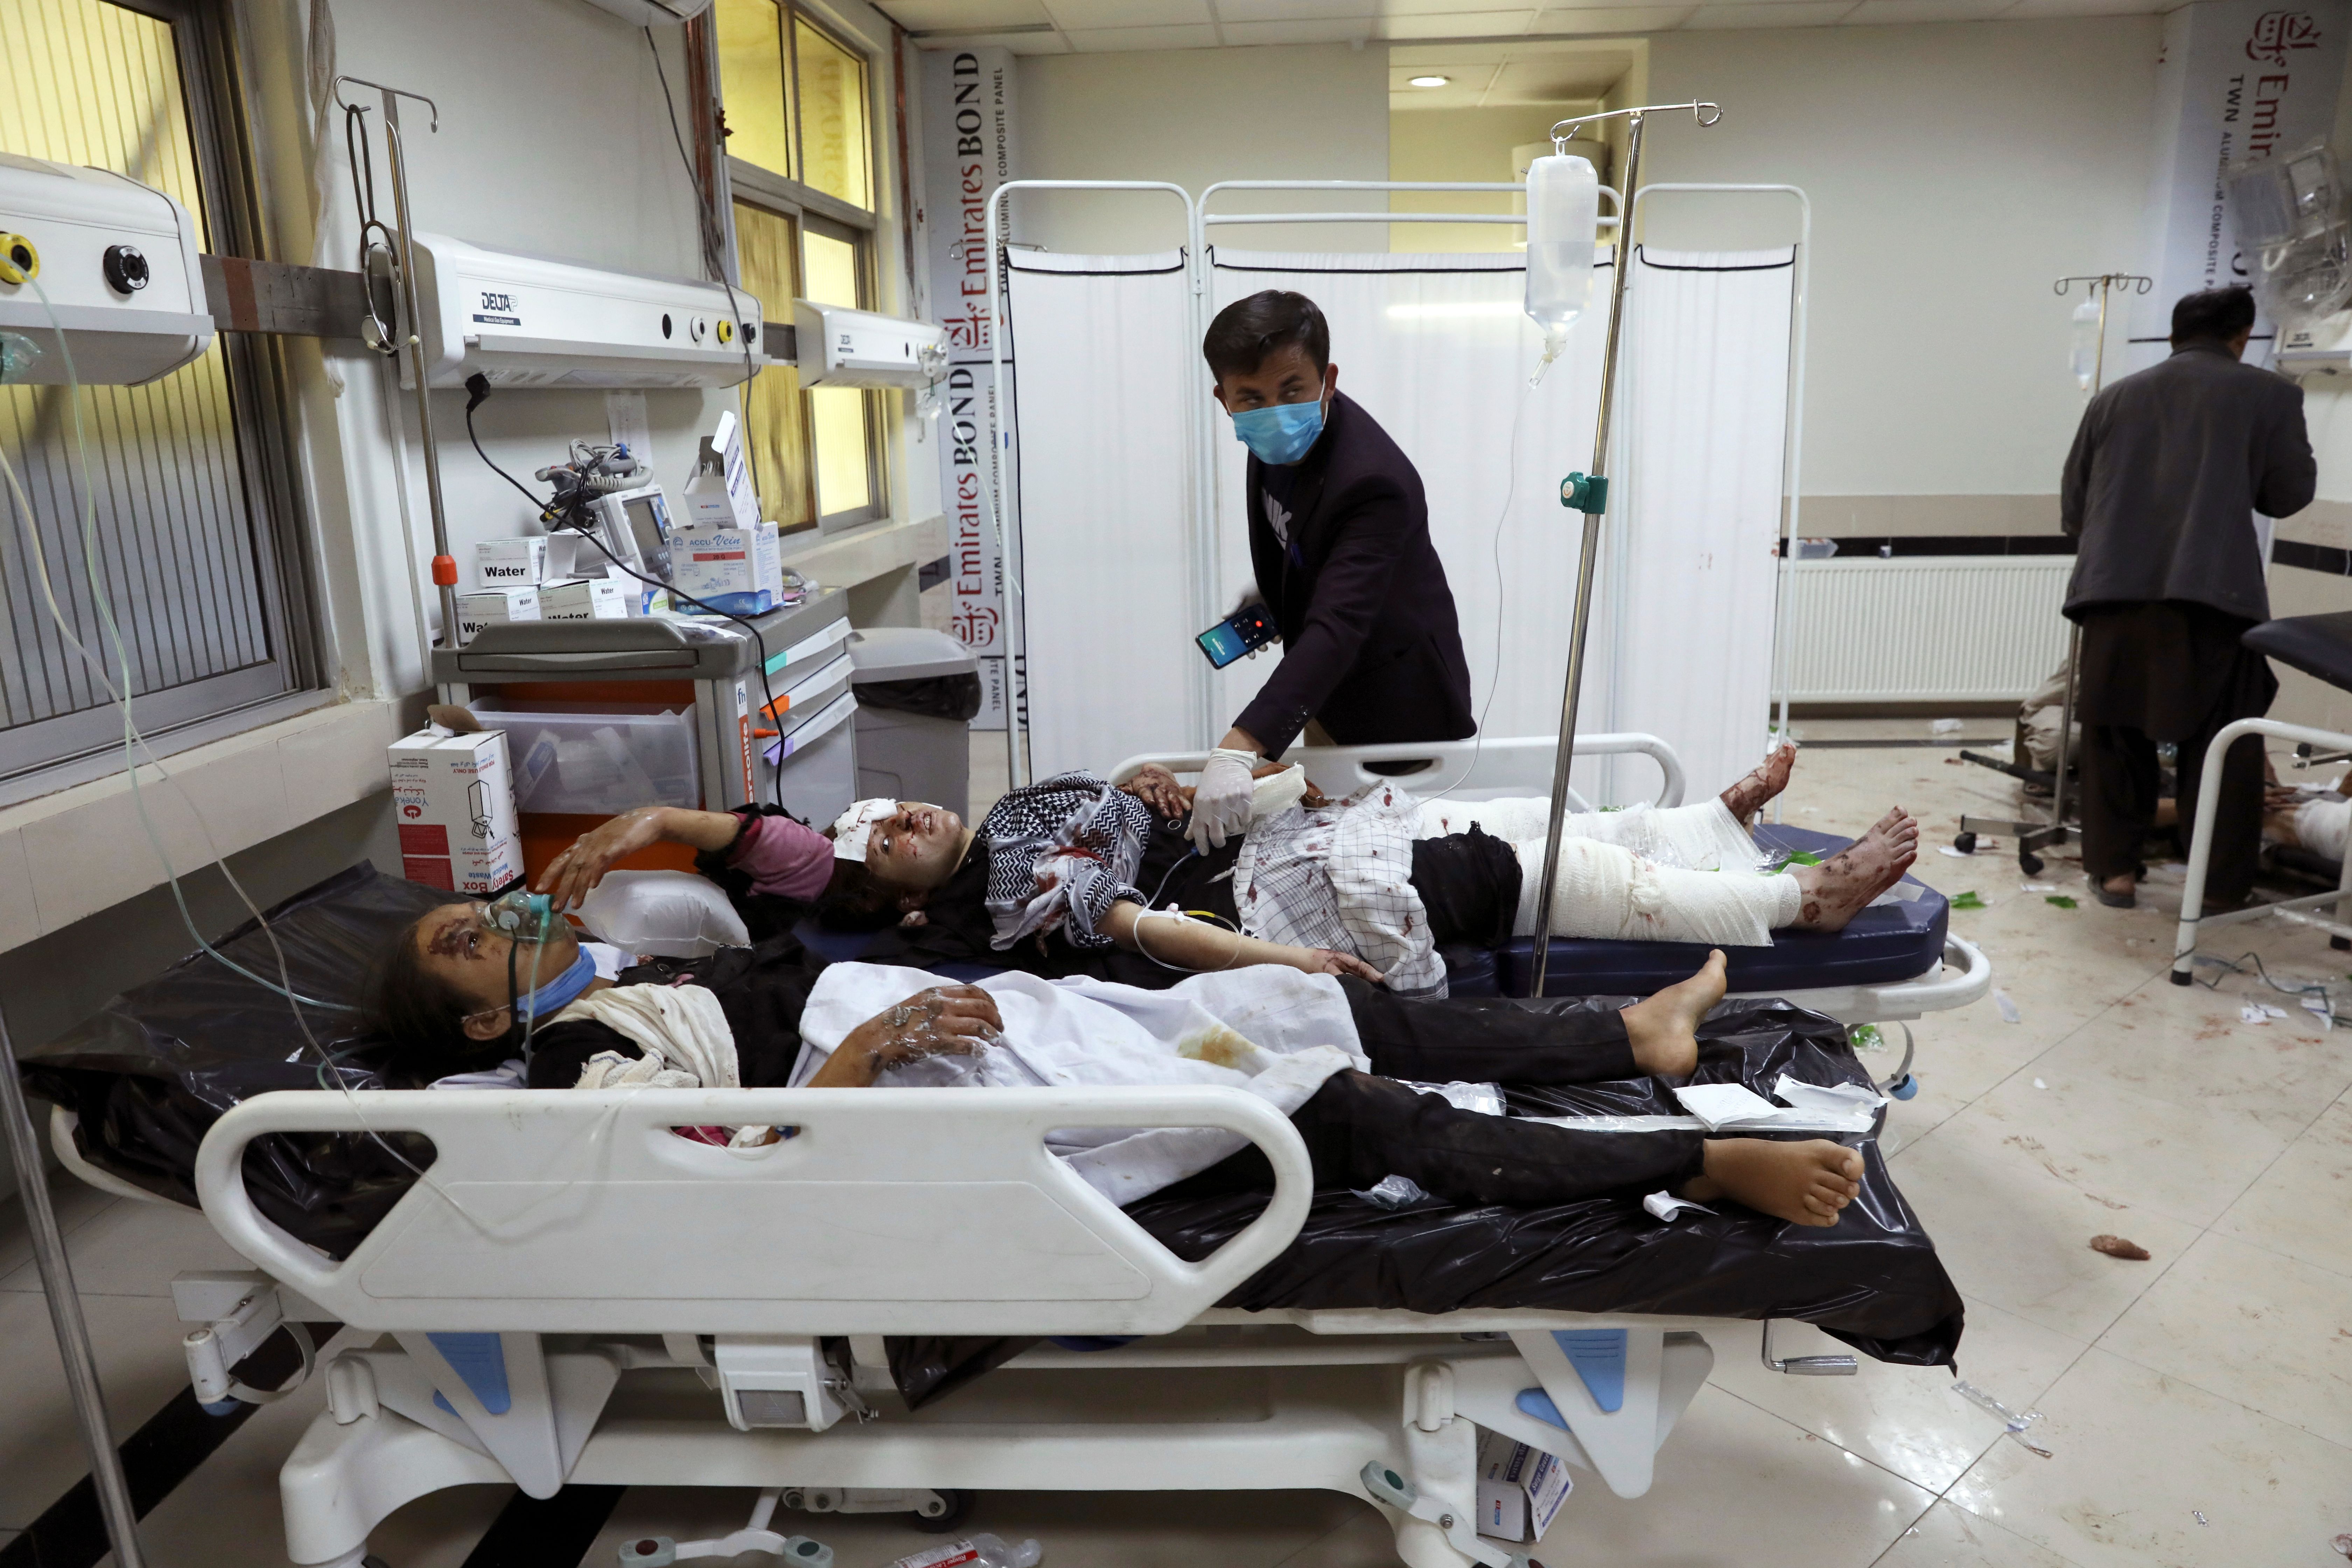 Afghan school students are treated at a hospital after a bomb explosion near a school in west of Kabul, Afghanistan, Saturday